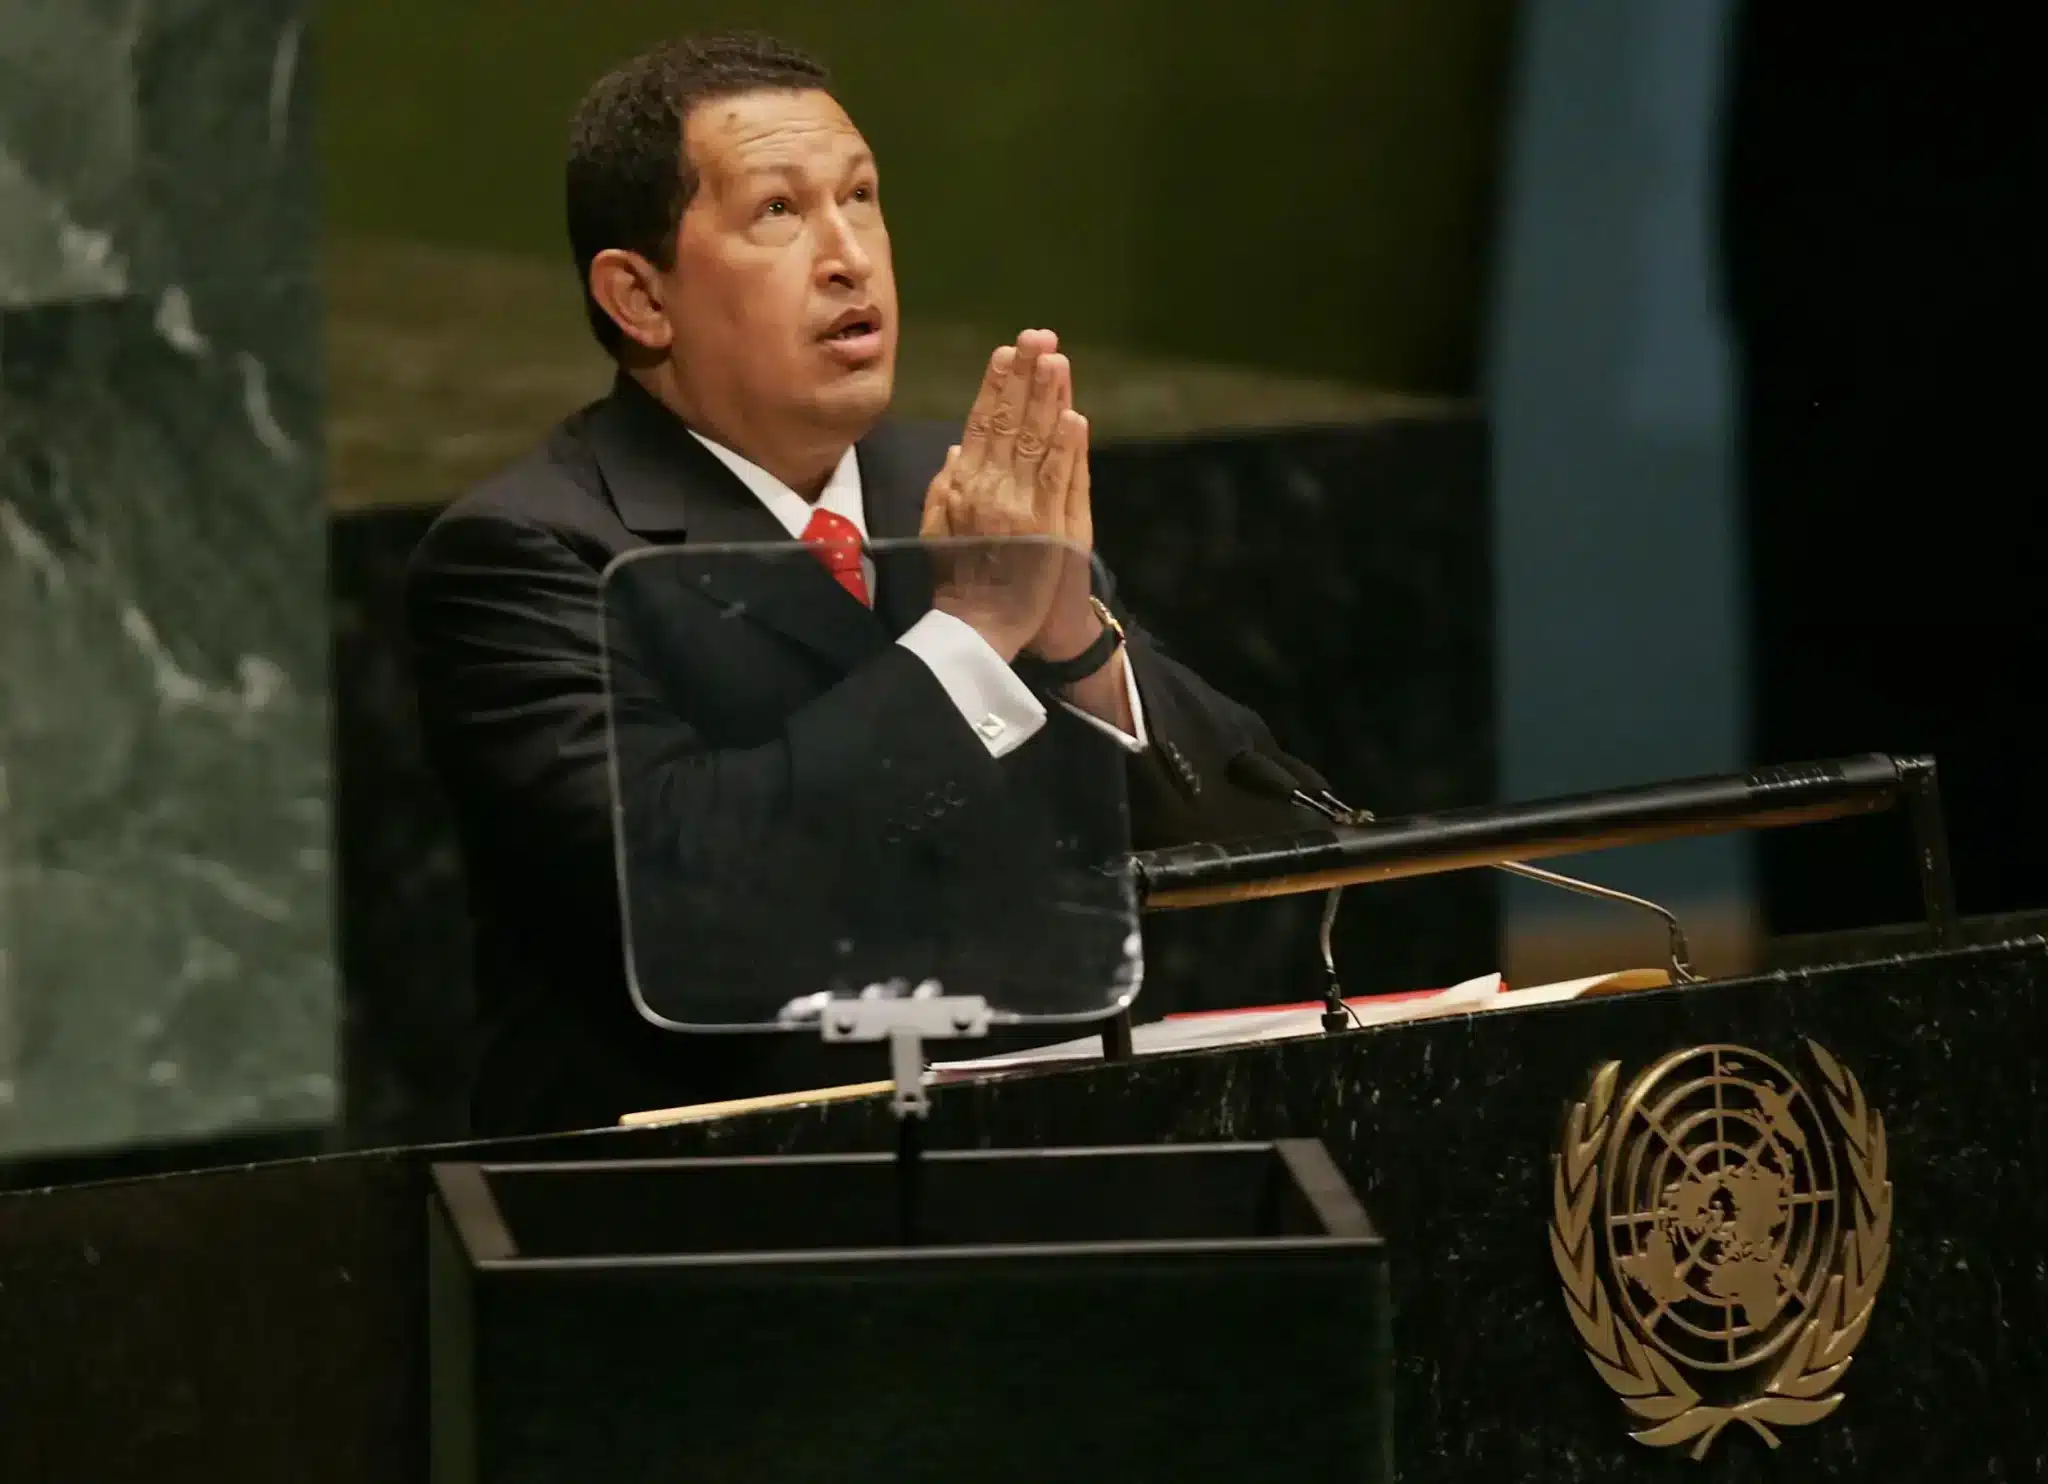 Then Venezuelan President Hugo Chávez giving his famous speech at the UN General Assembly in 2006. Photo: Reuters/File photo.